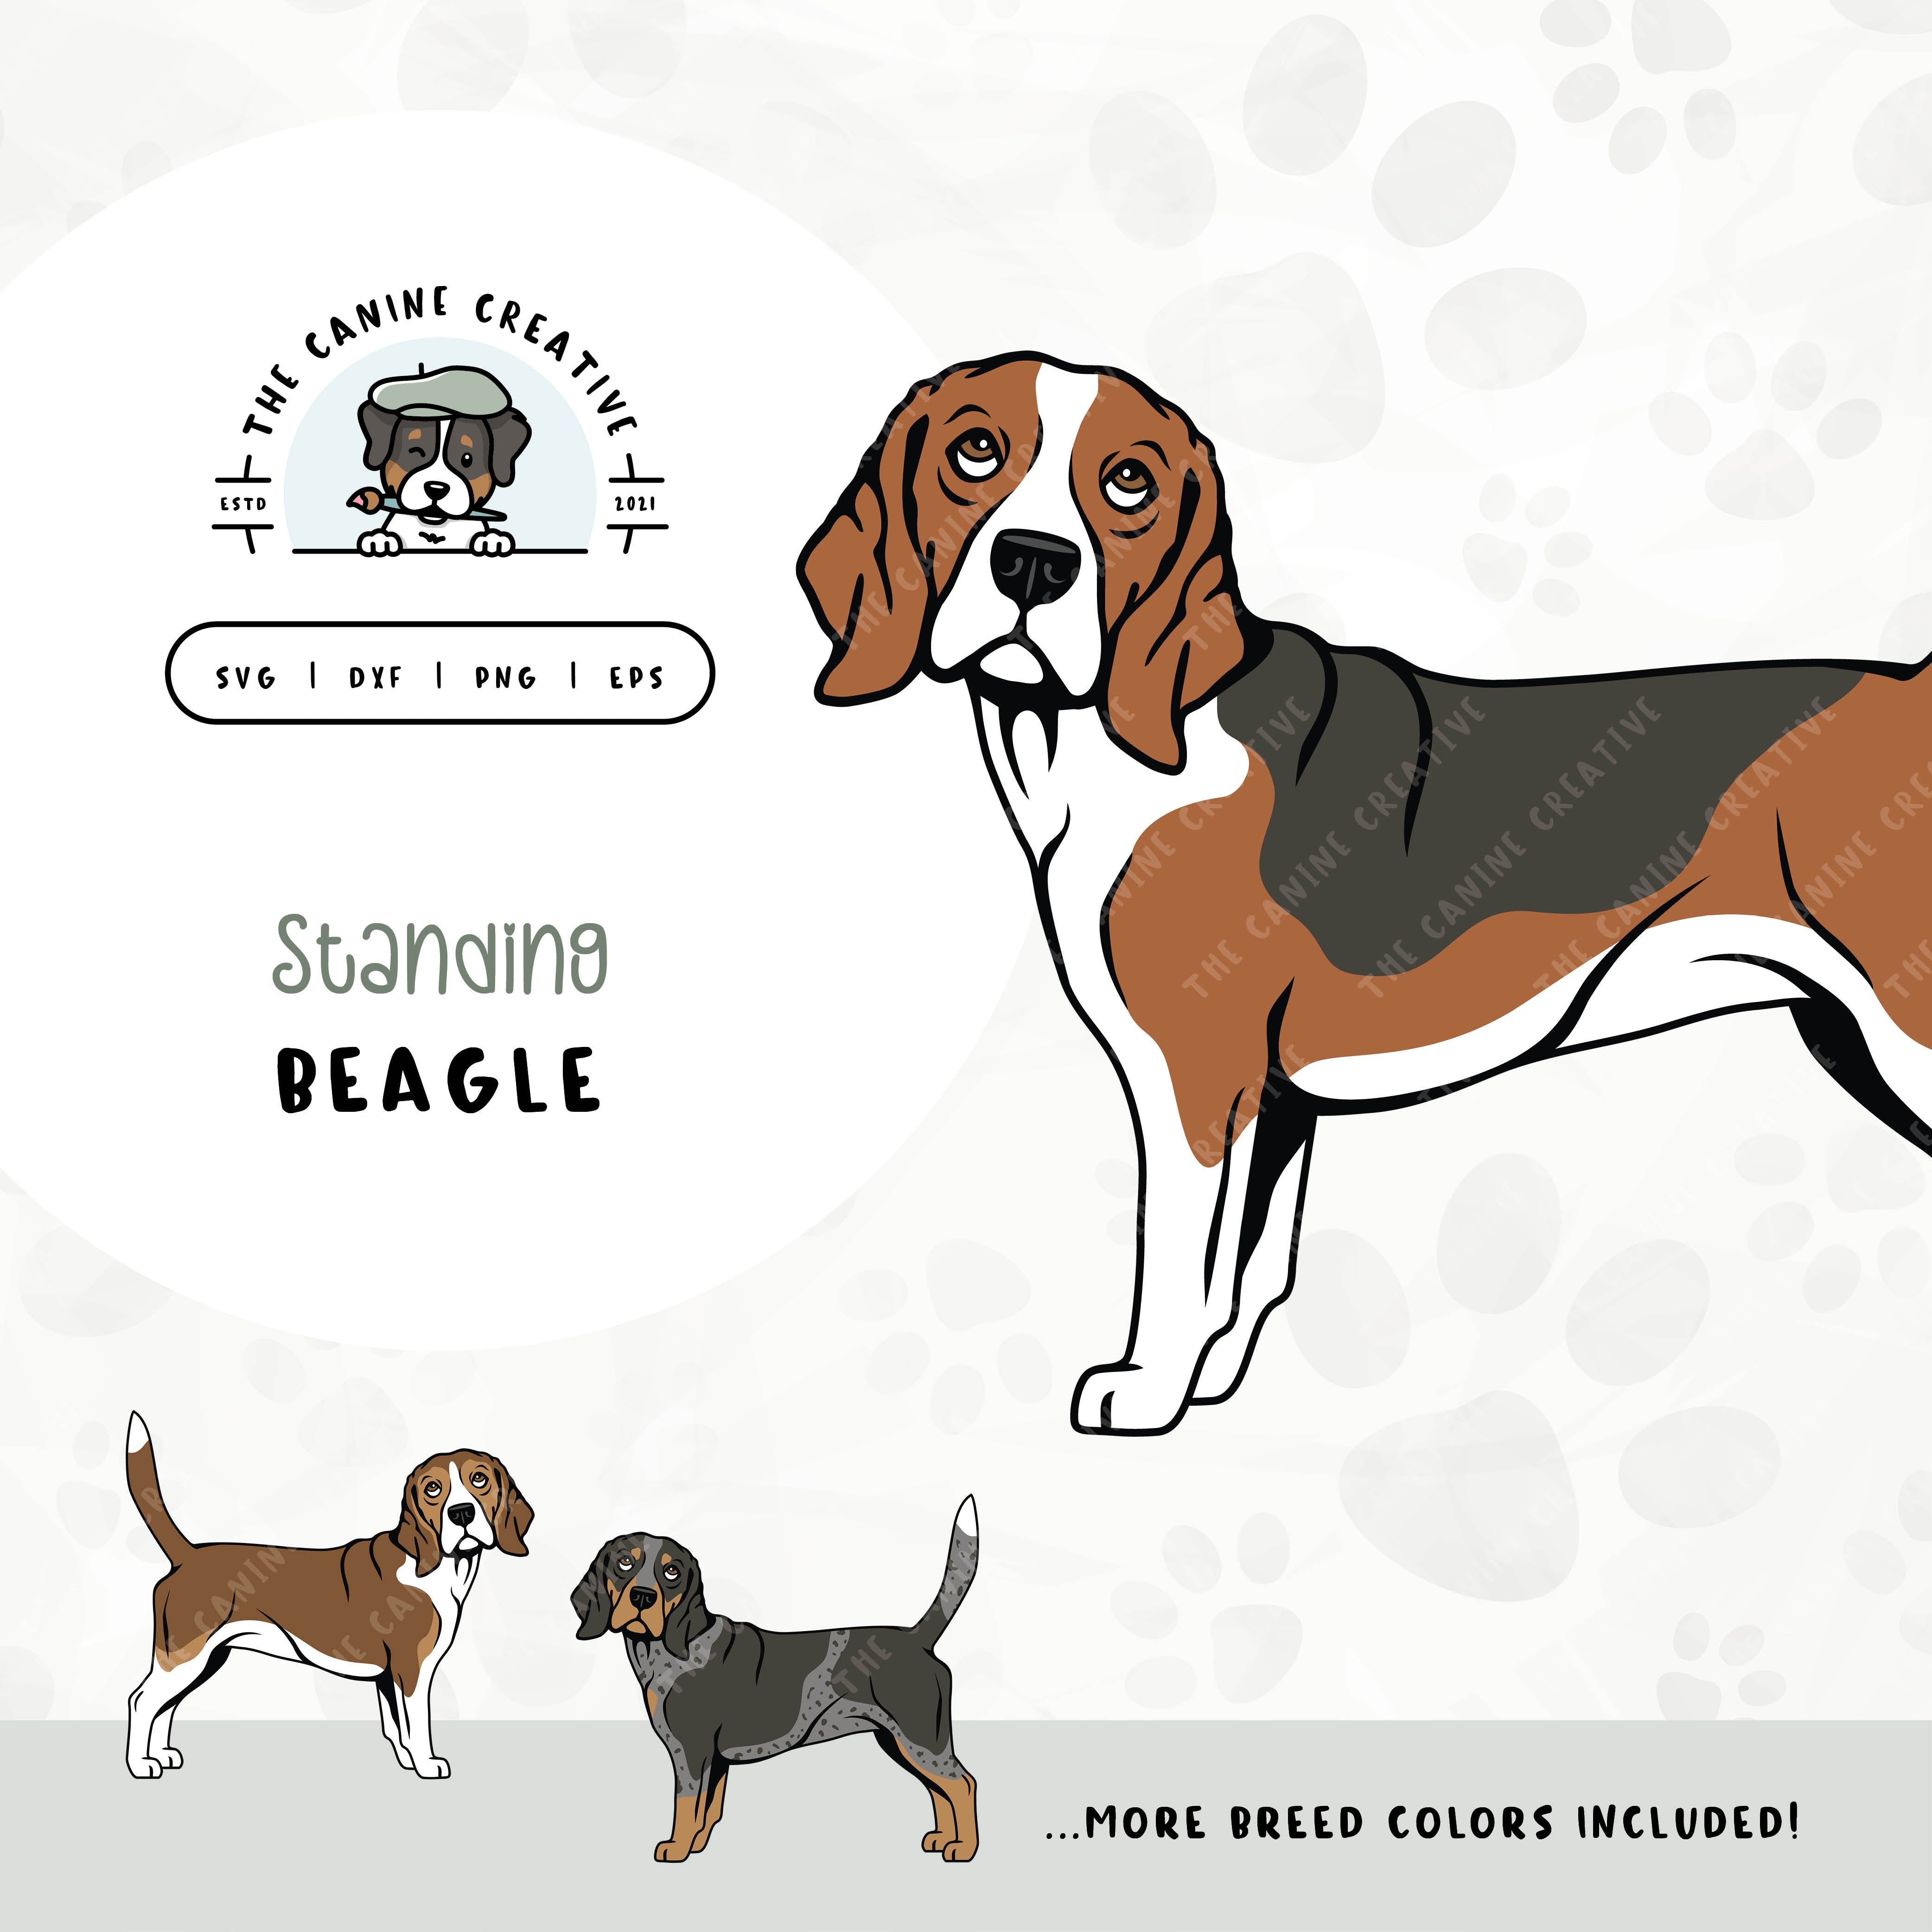 This standing dog design features a Beagle. File formats include: SVG, DXF, PNG, and EPS.